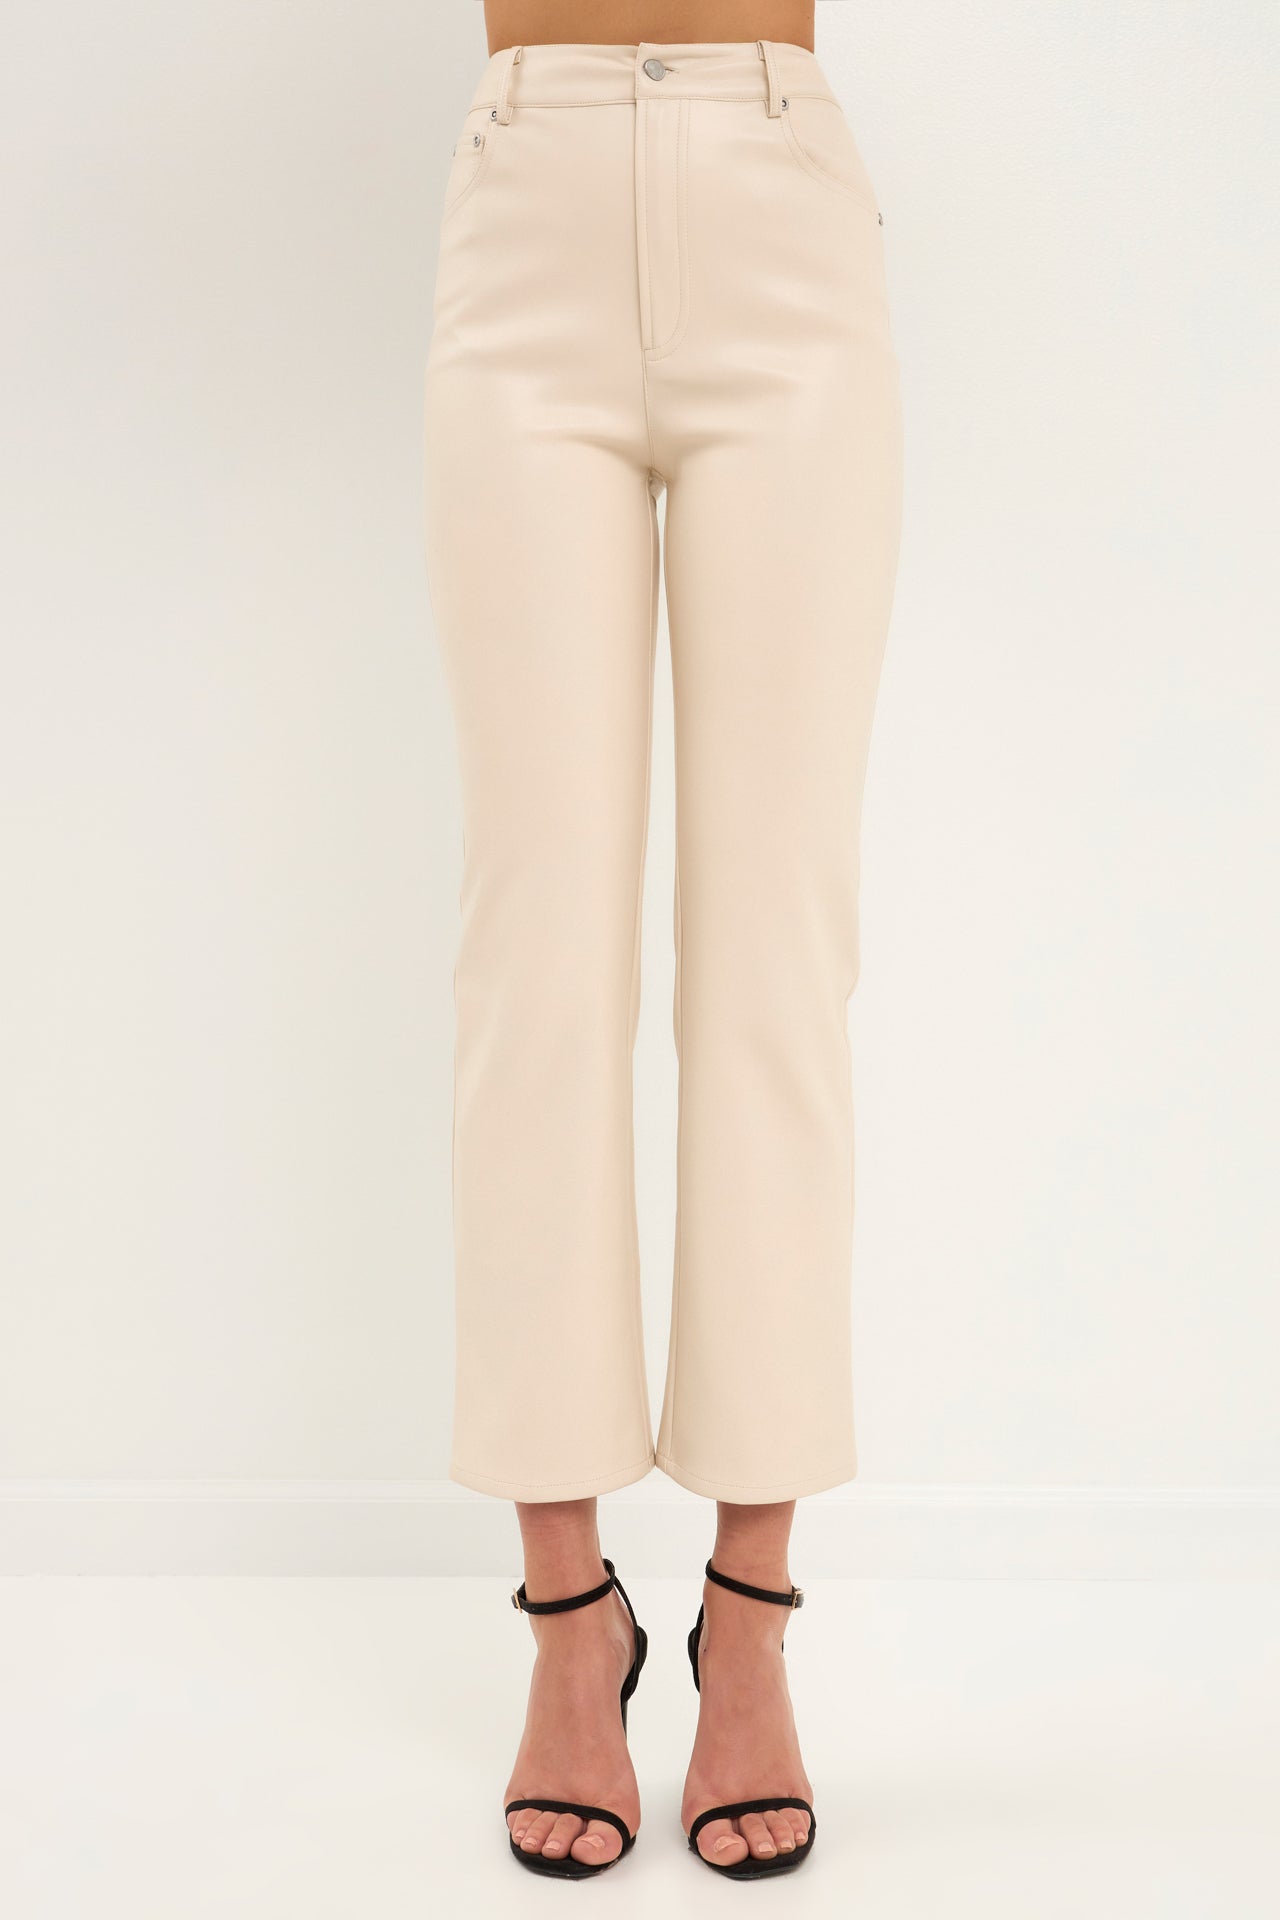 GREY LAB-High-Waisted Faux Leather Pants-PANTS available at Objectrare